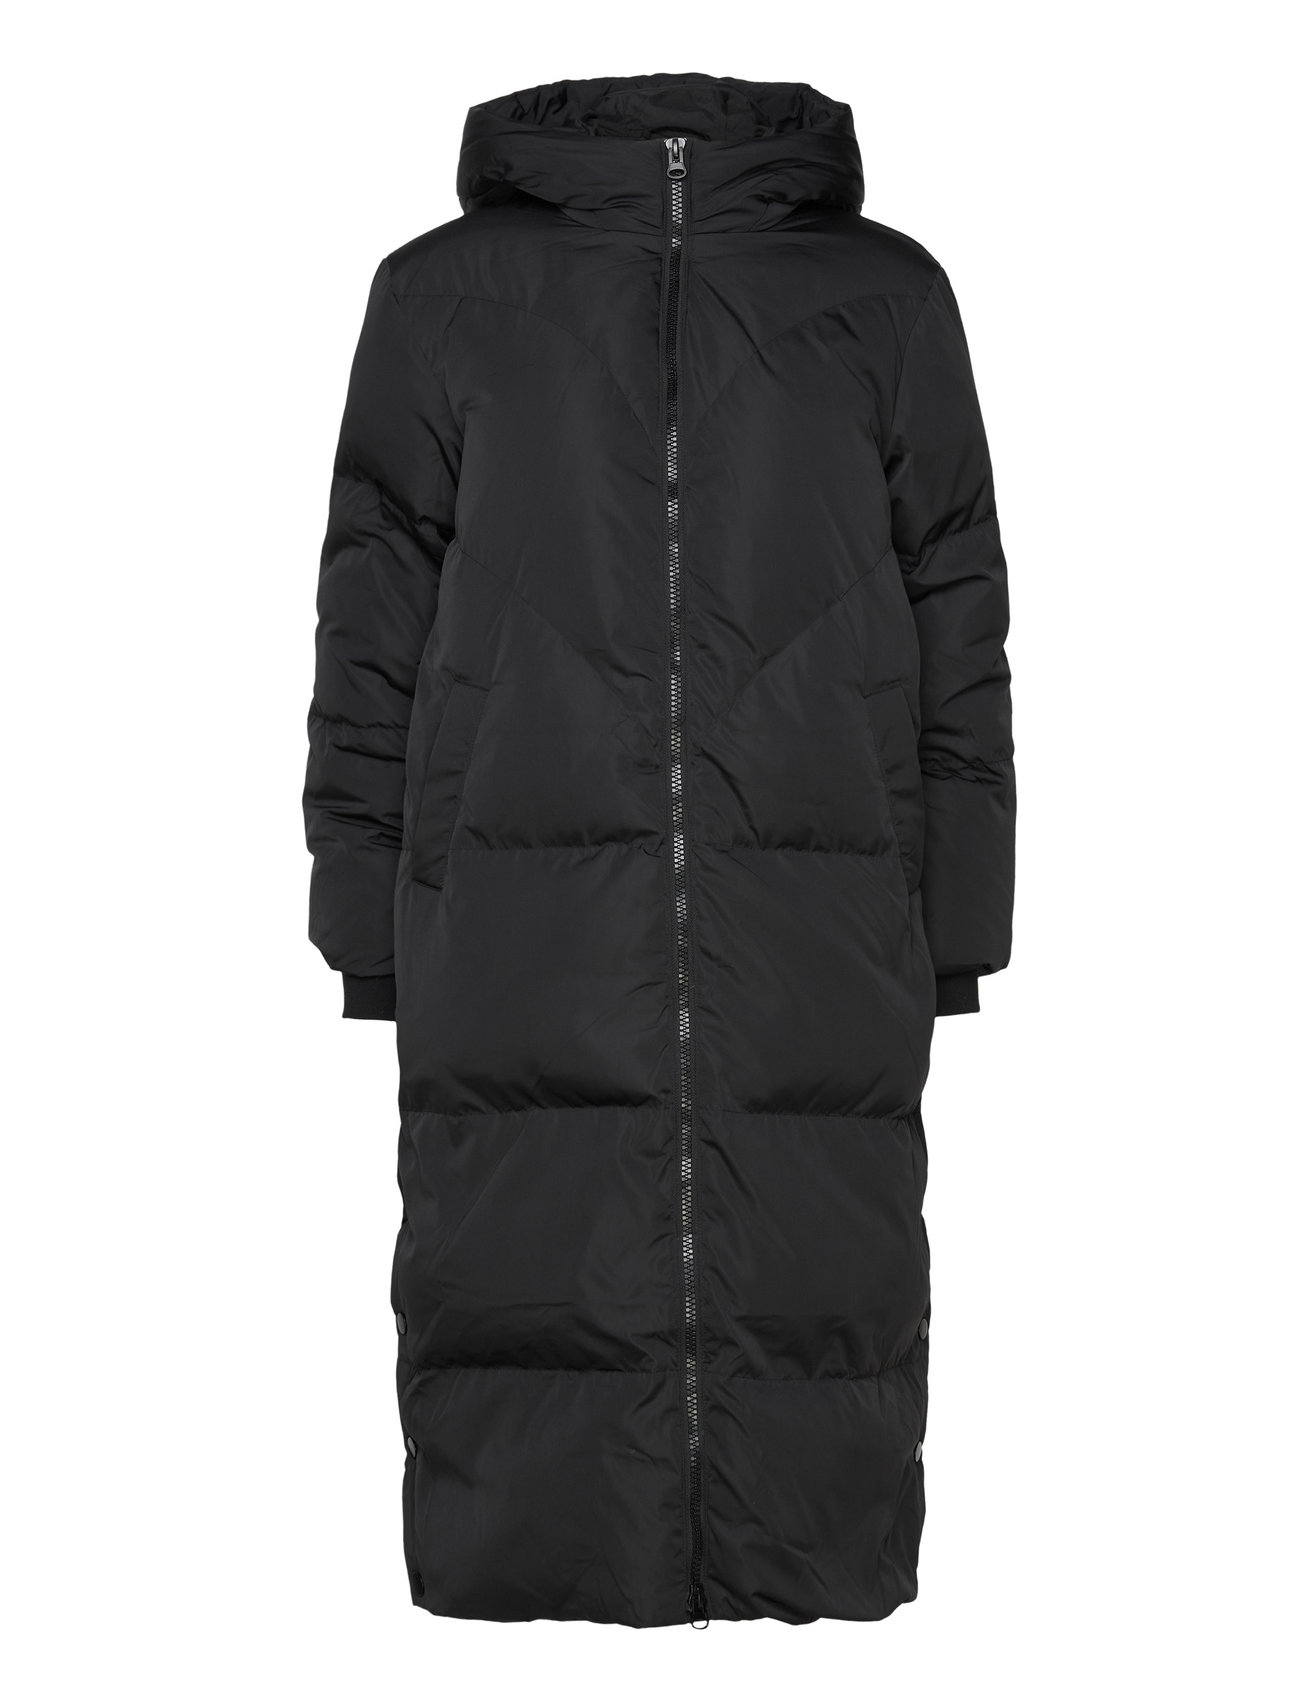 YAS Yasirima Ls Long Down Coat S. Noos - 85.00 €. Buy Padded Coats from YAS  online at Boozt.com. Fast delivery and easy returns